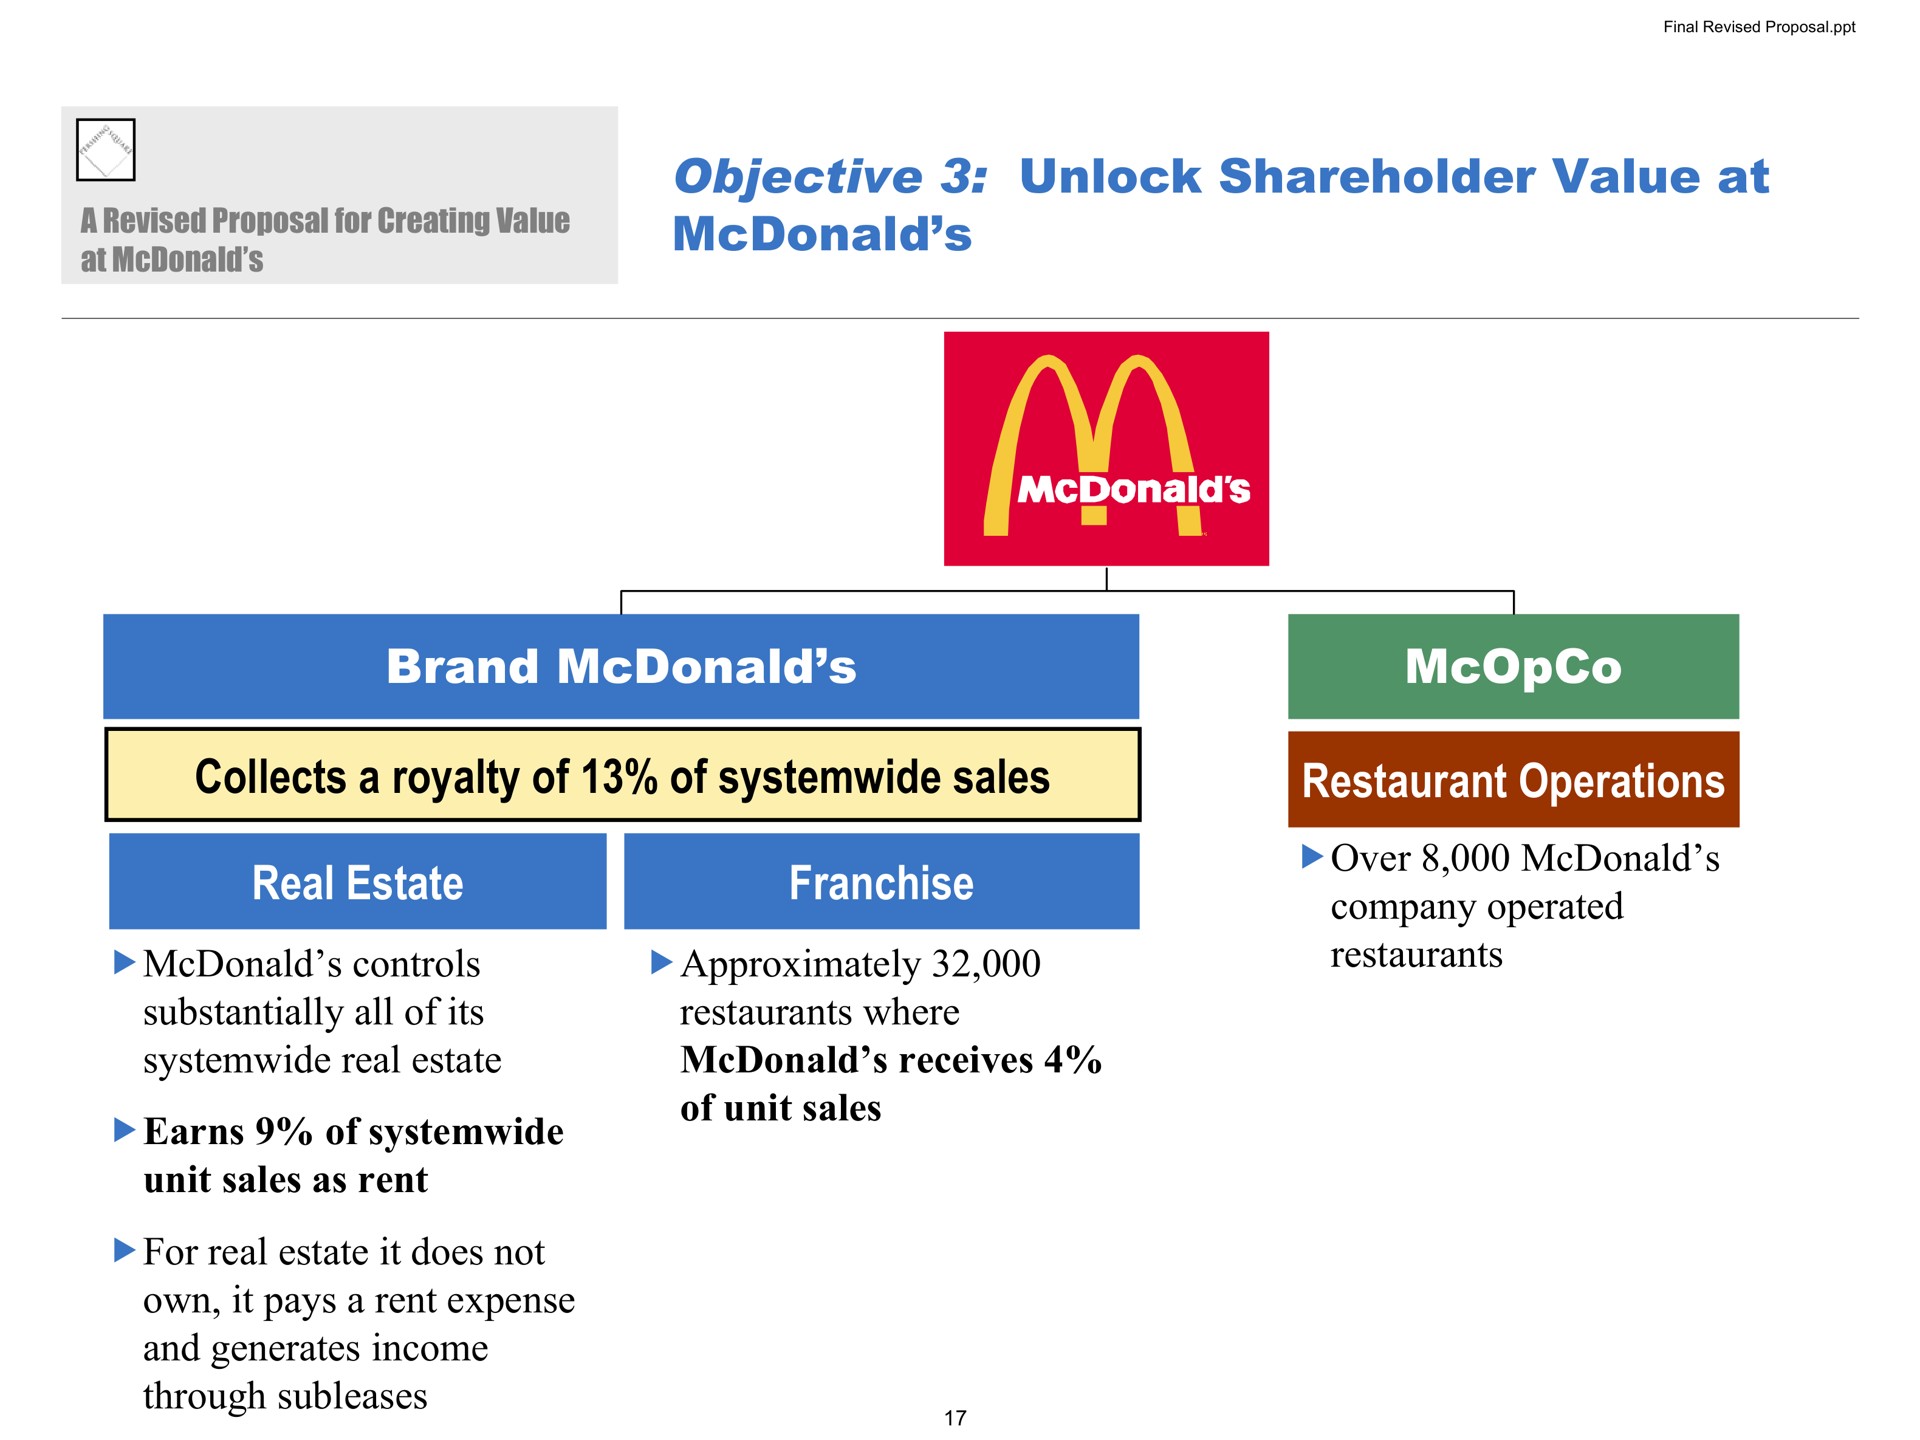 objective unlock shareholder value at brand restaurant operations over company operated restaurants collects a royalty of of sales real estate franchise controls substantially all of its real estate earns of unit sales as rent for real estate it does not own it pays a rent expense and generates income through subleases approximately restaurants where receives of unit sales sal | Pershing Square